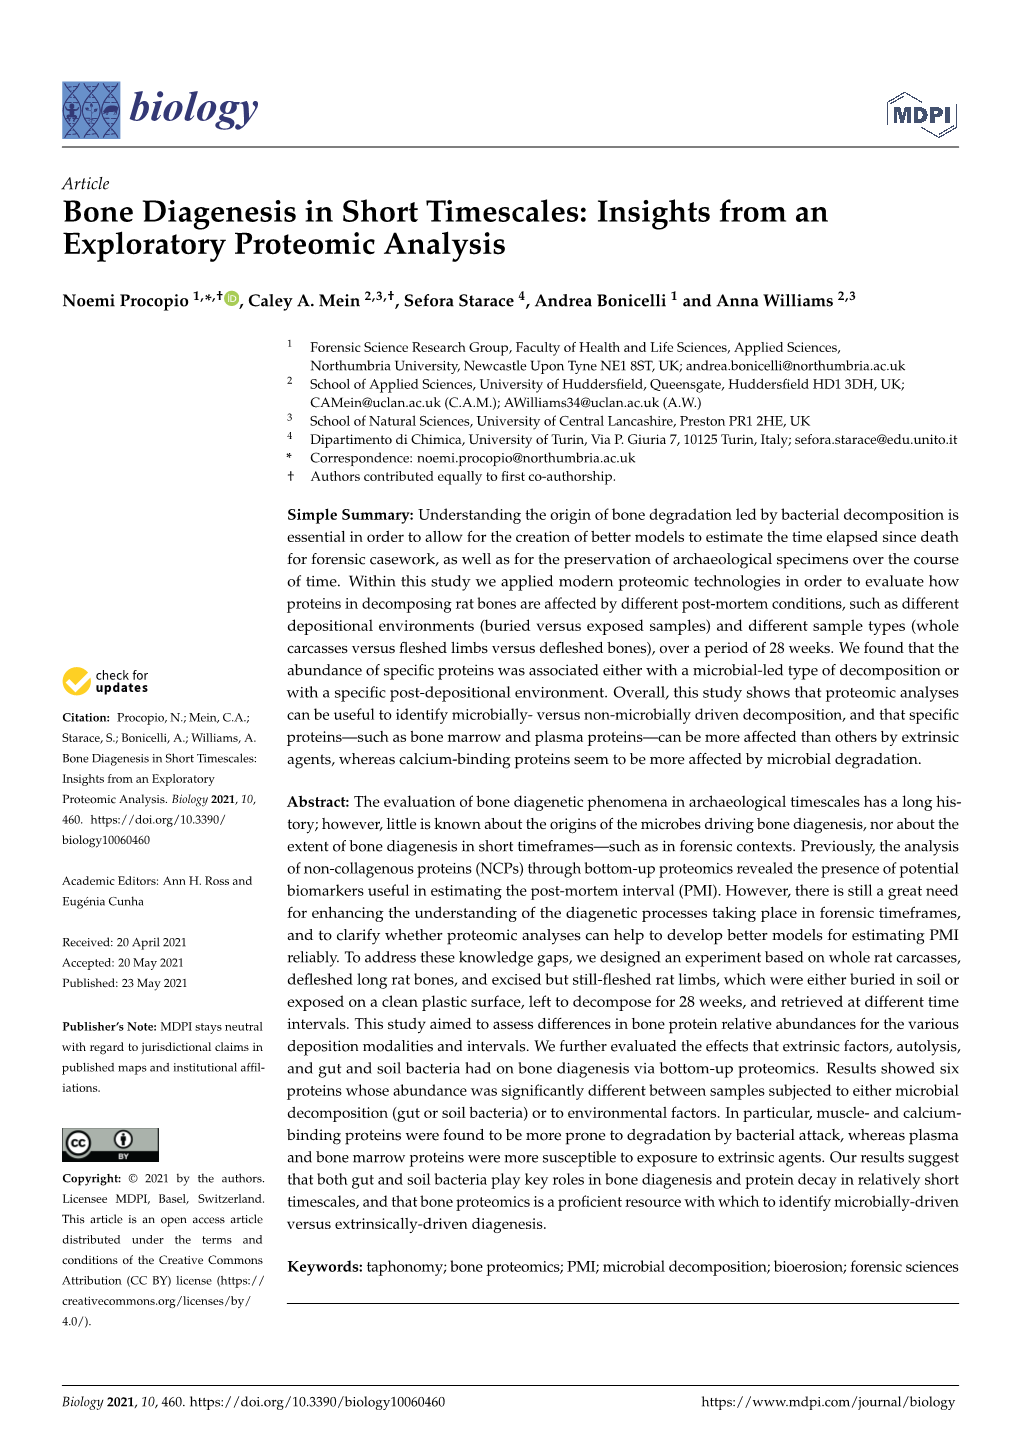 Bone Diagenesis in Short Timescales: Insights from an Exploratory Proteomic Analysis